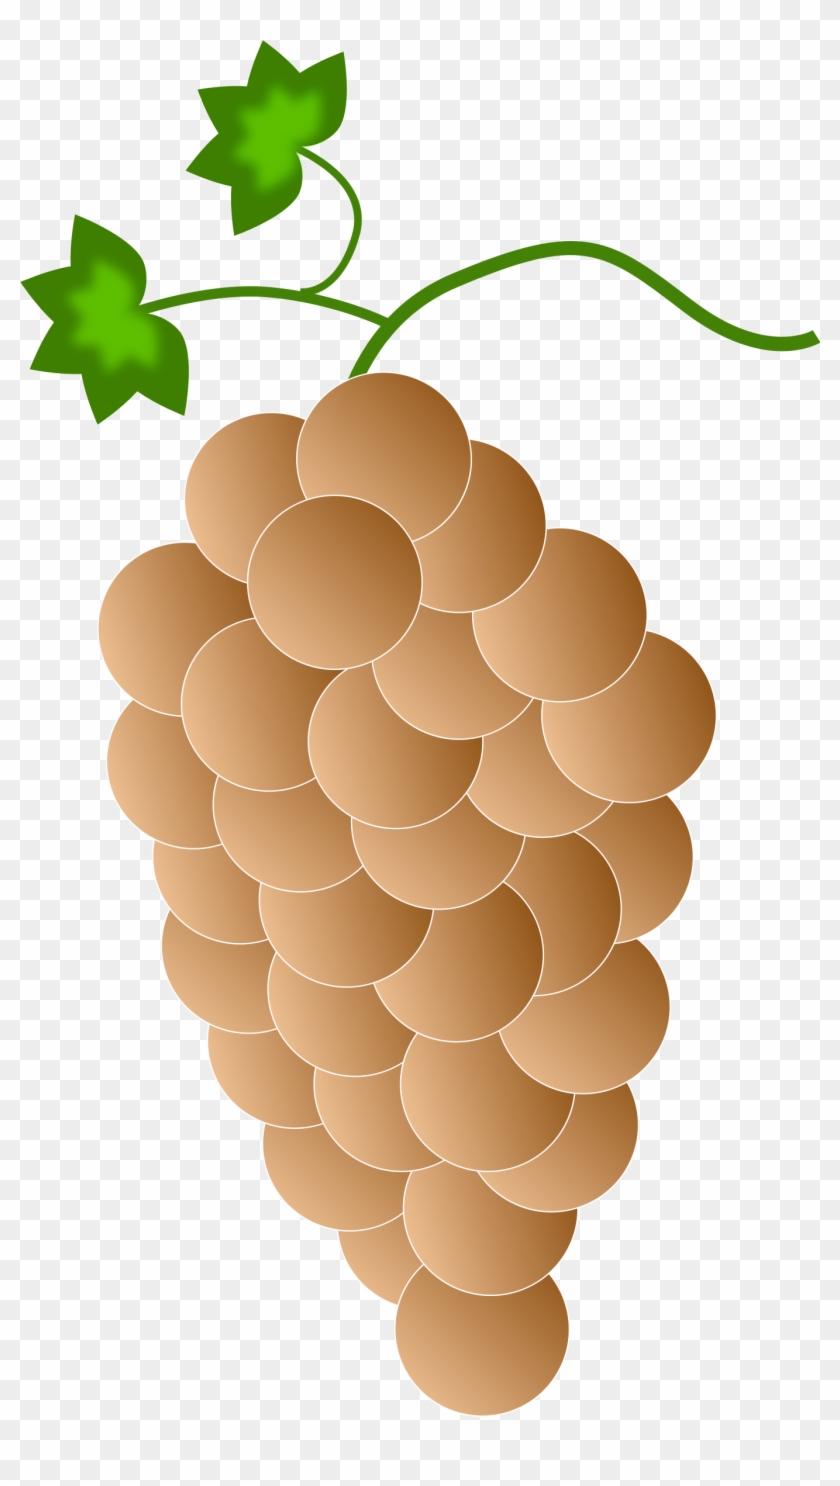 This Free Icons Png Design Of Orange Grapes Clipart #1000613